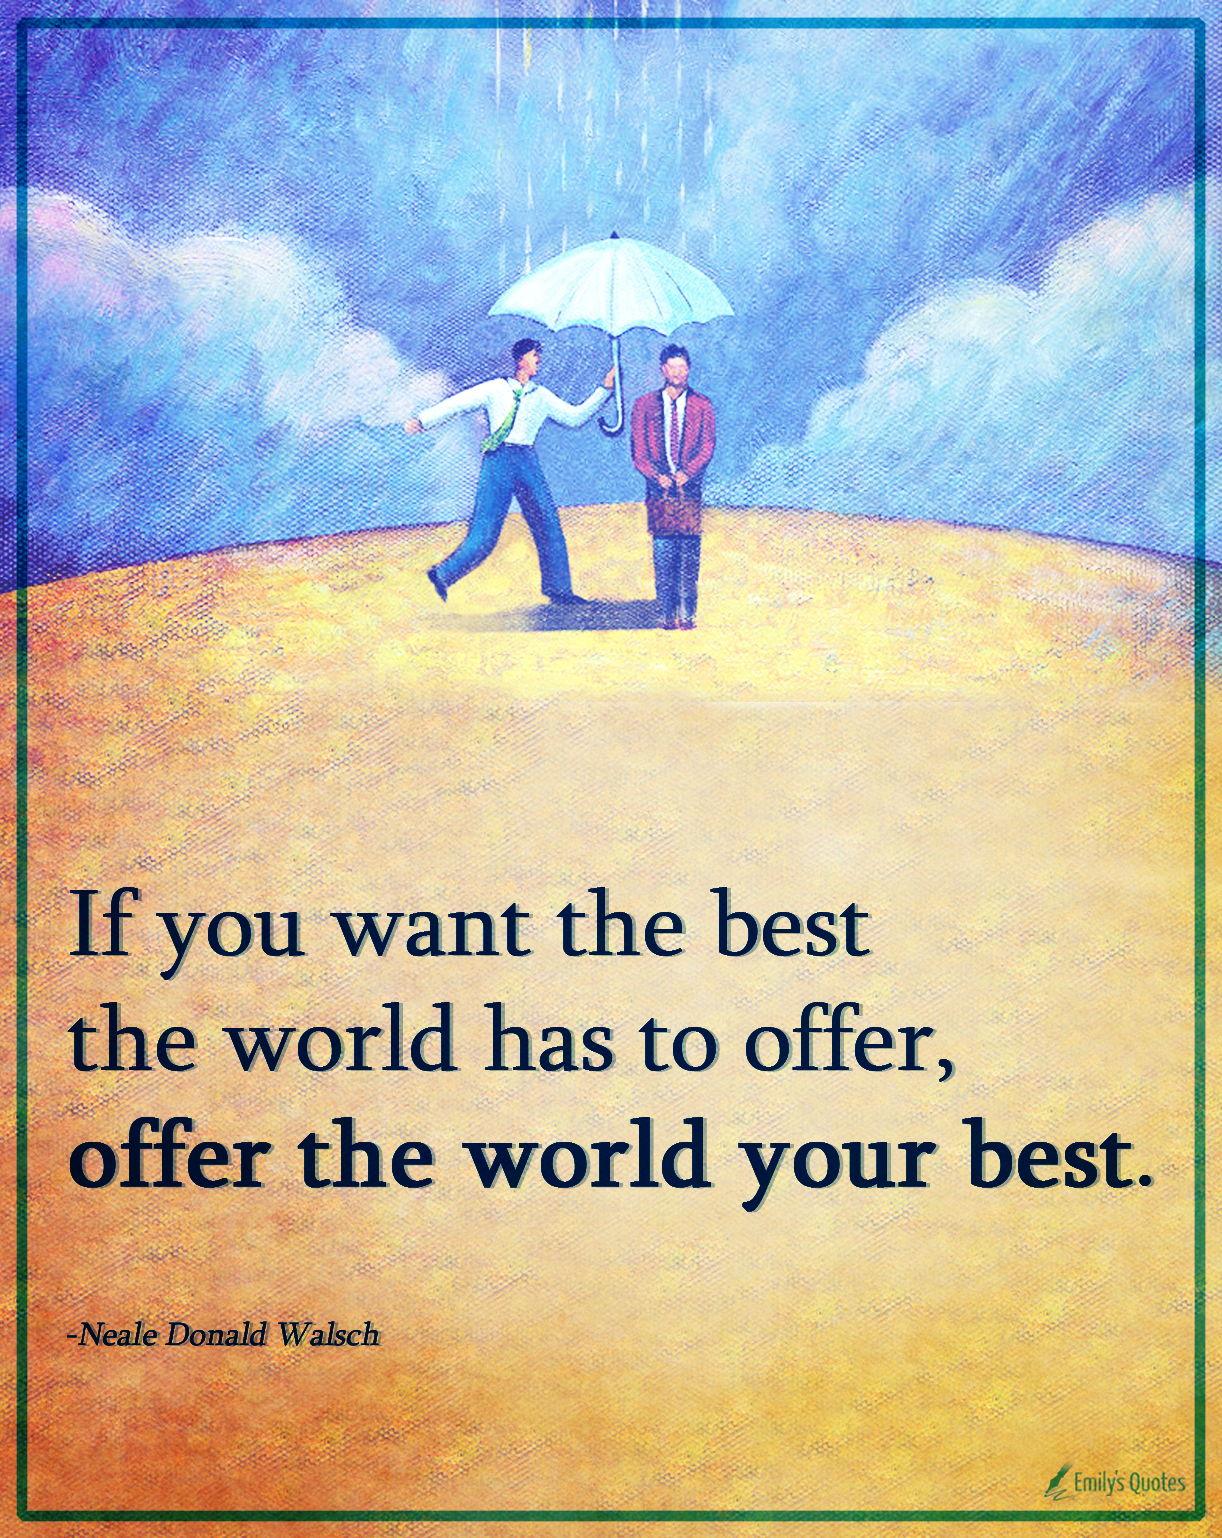 If you want the best the world has to offer, offer the world your best